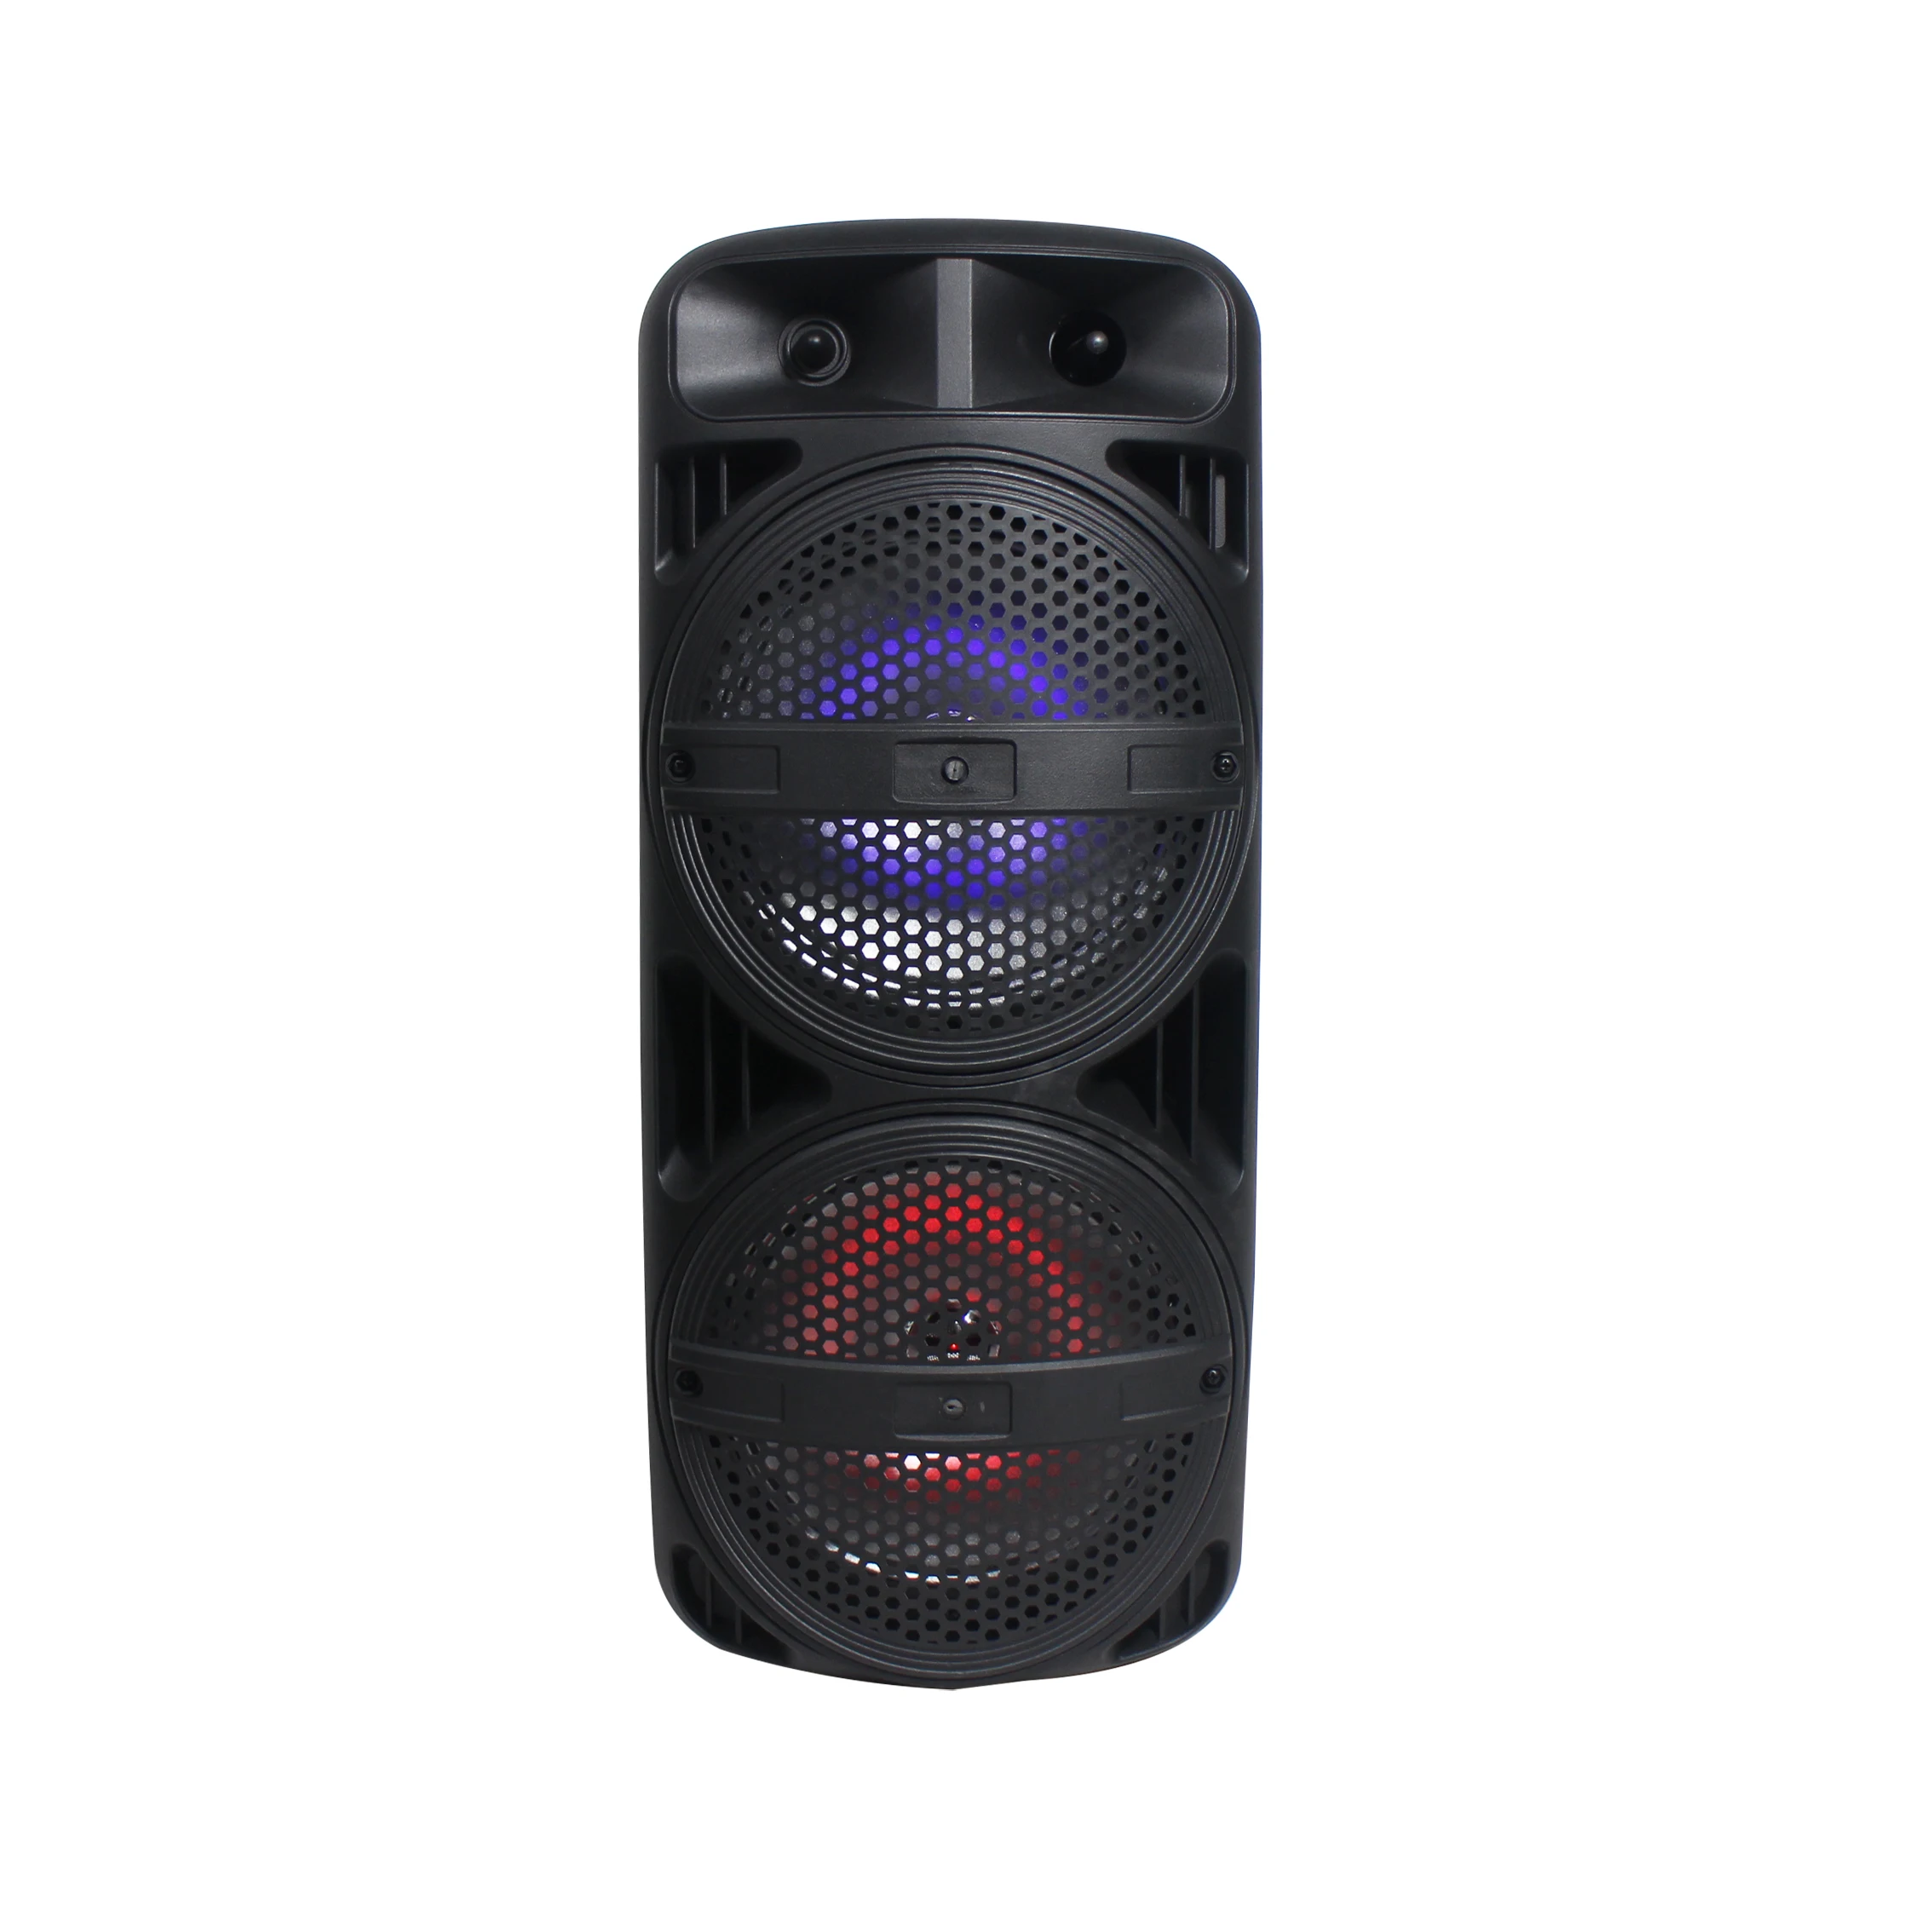 LED Wireless Bluetooth Speaker Portable Stereo Loud Speakers Super Bass Sound